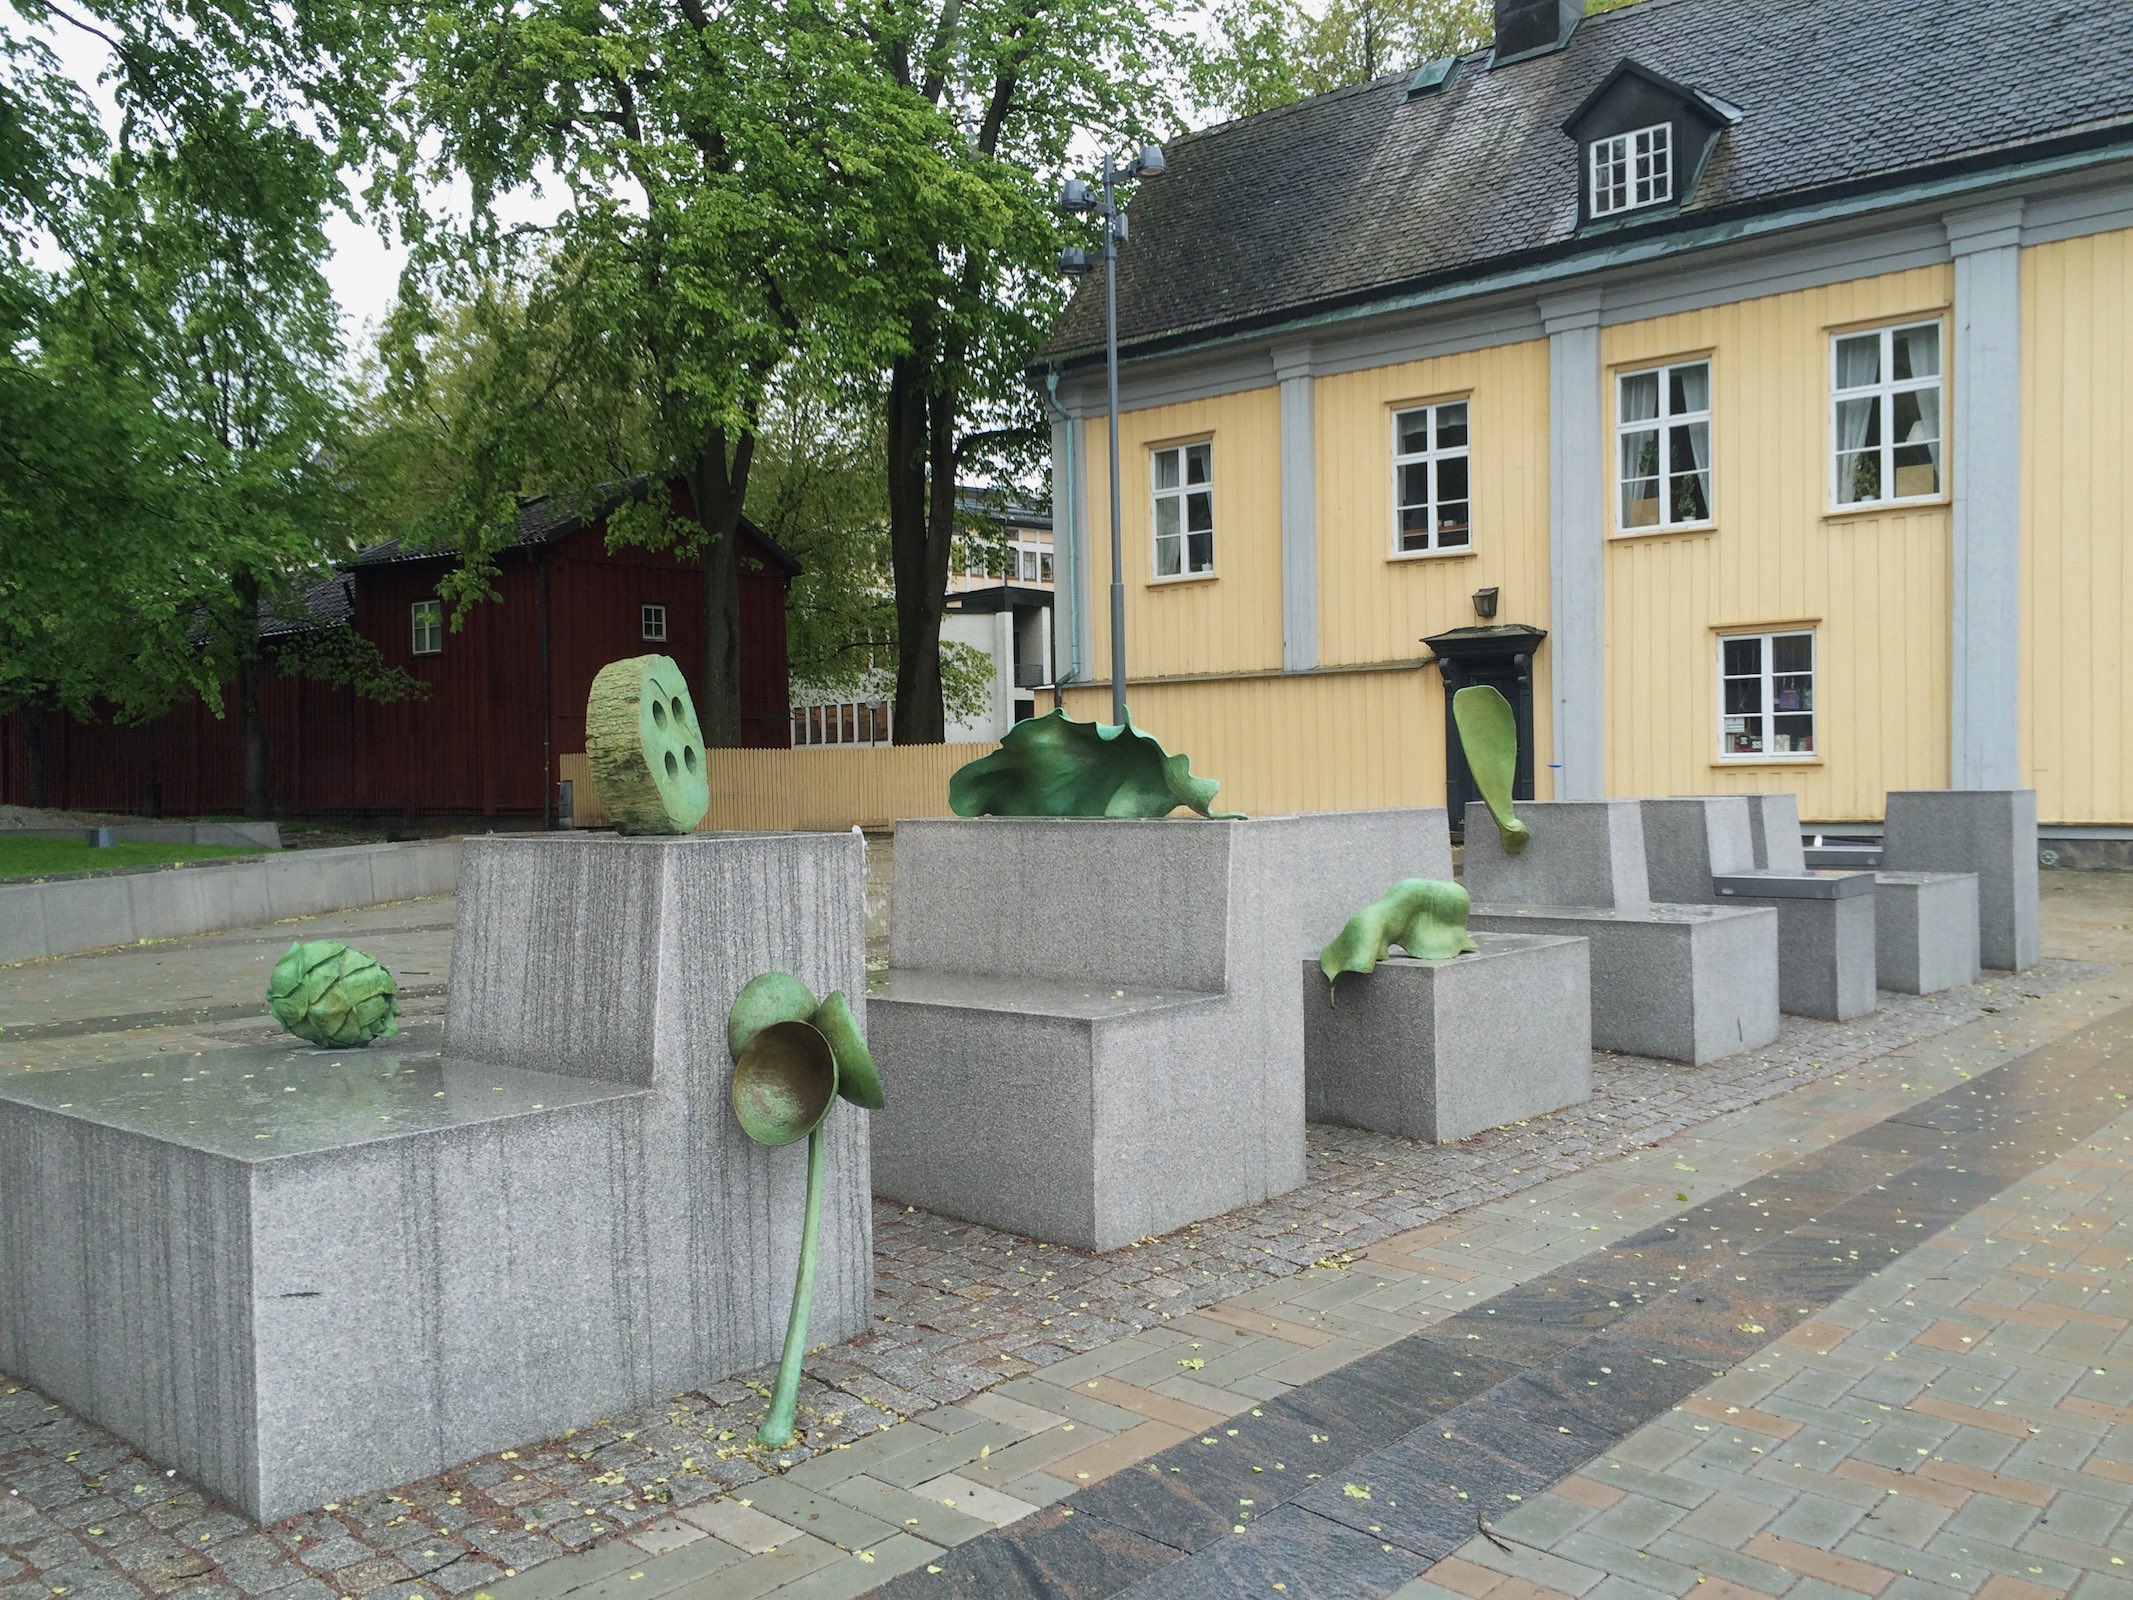 Carl Boutard, River Walk, 2015, comissioned by Karlstad Municipality. A site specific permanent installation in public space consisting of enlarged fragments of nature. In themselves insignificant these minuscule objects were found and carefully chosen by the artist during strolls along the adjacent Klarälven river. One of the bronze sculptures is situated 25 feet up in an elm tree. It was modelled with maple trees cut down while renovating the site.